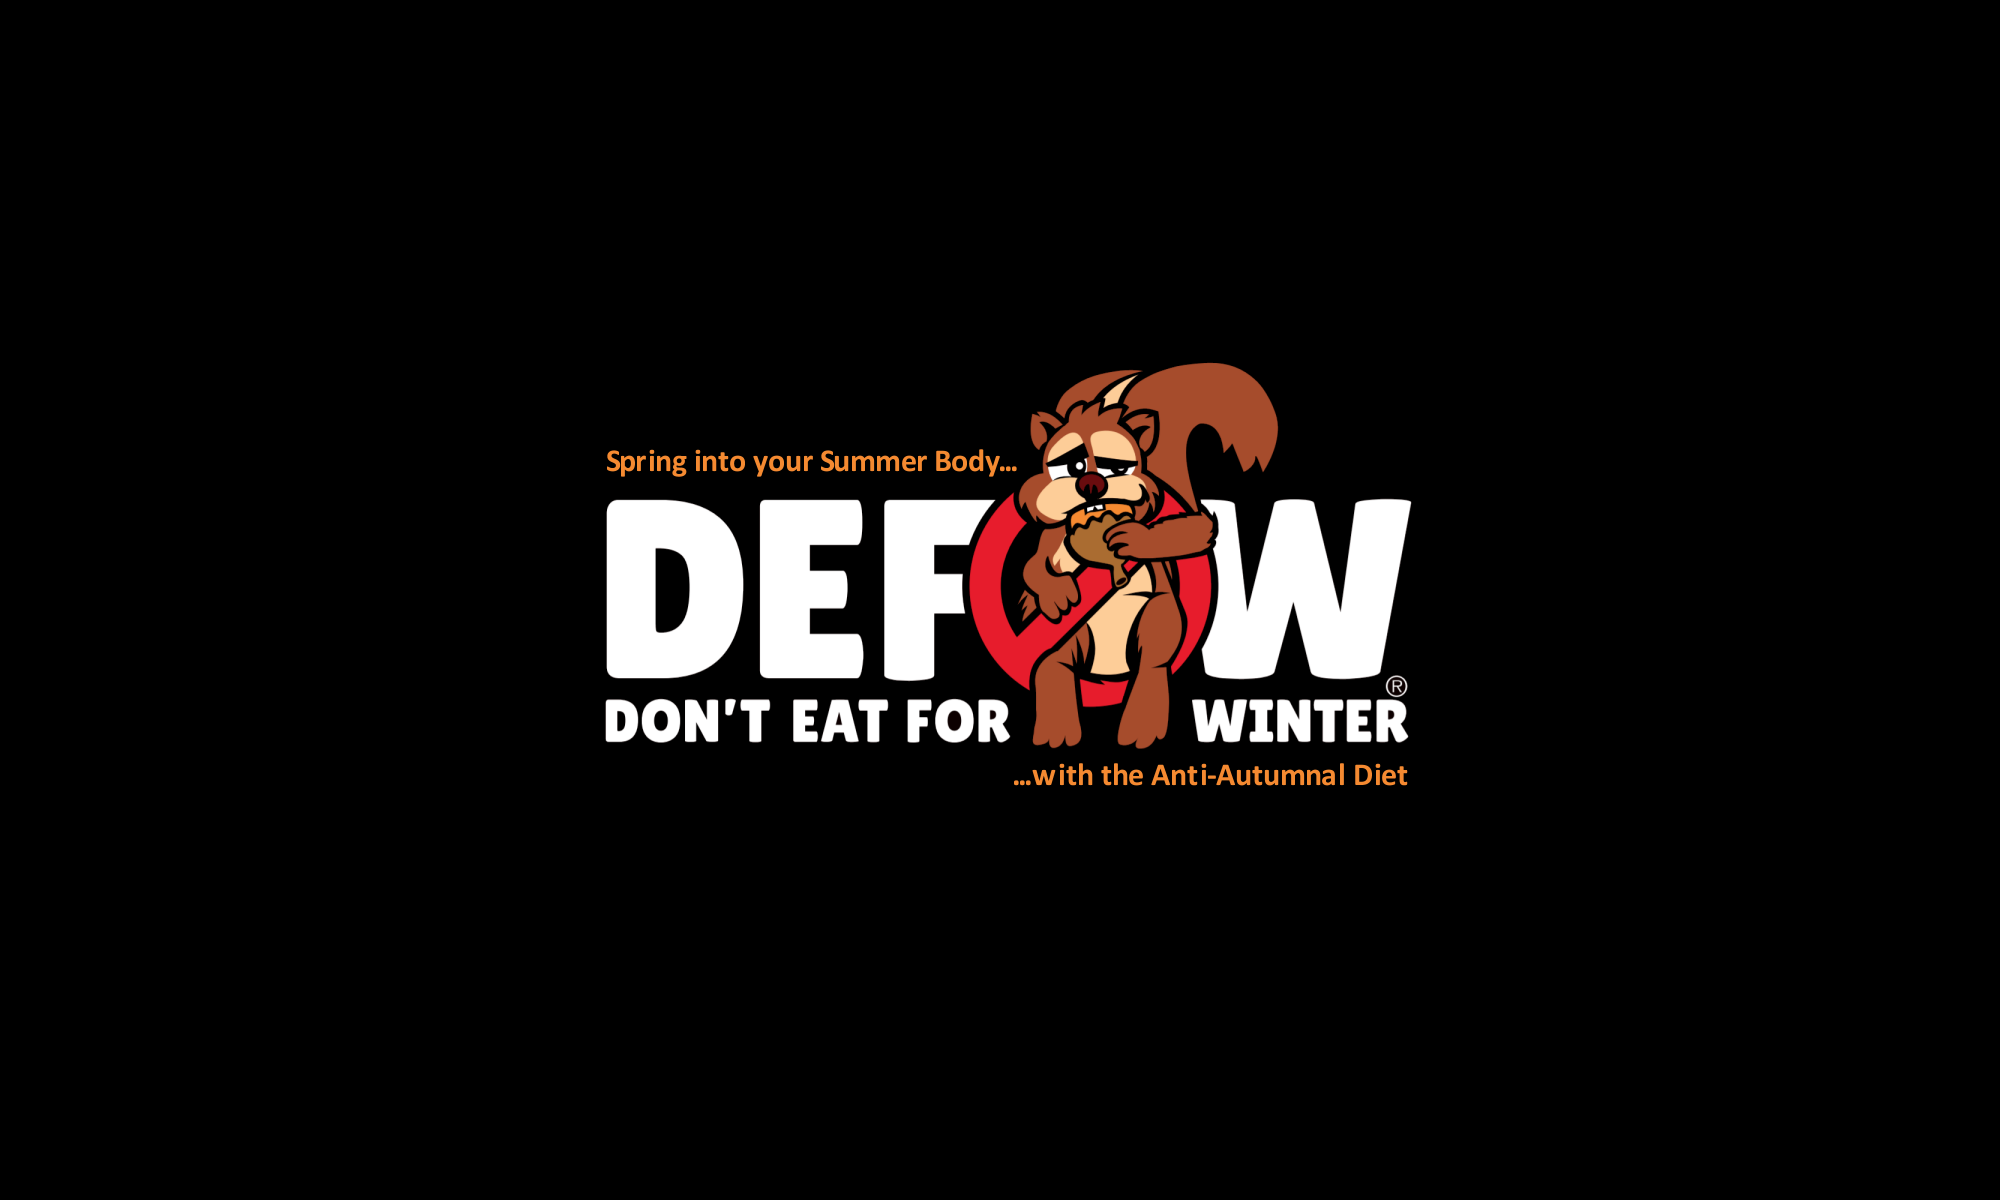 Don't Eat for Winter